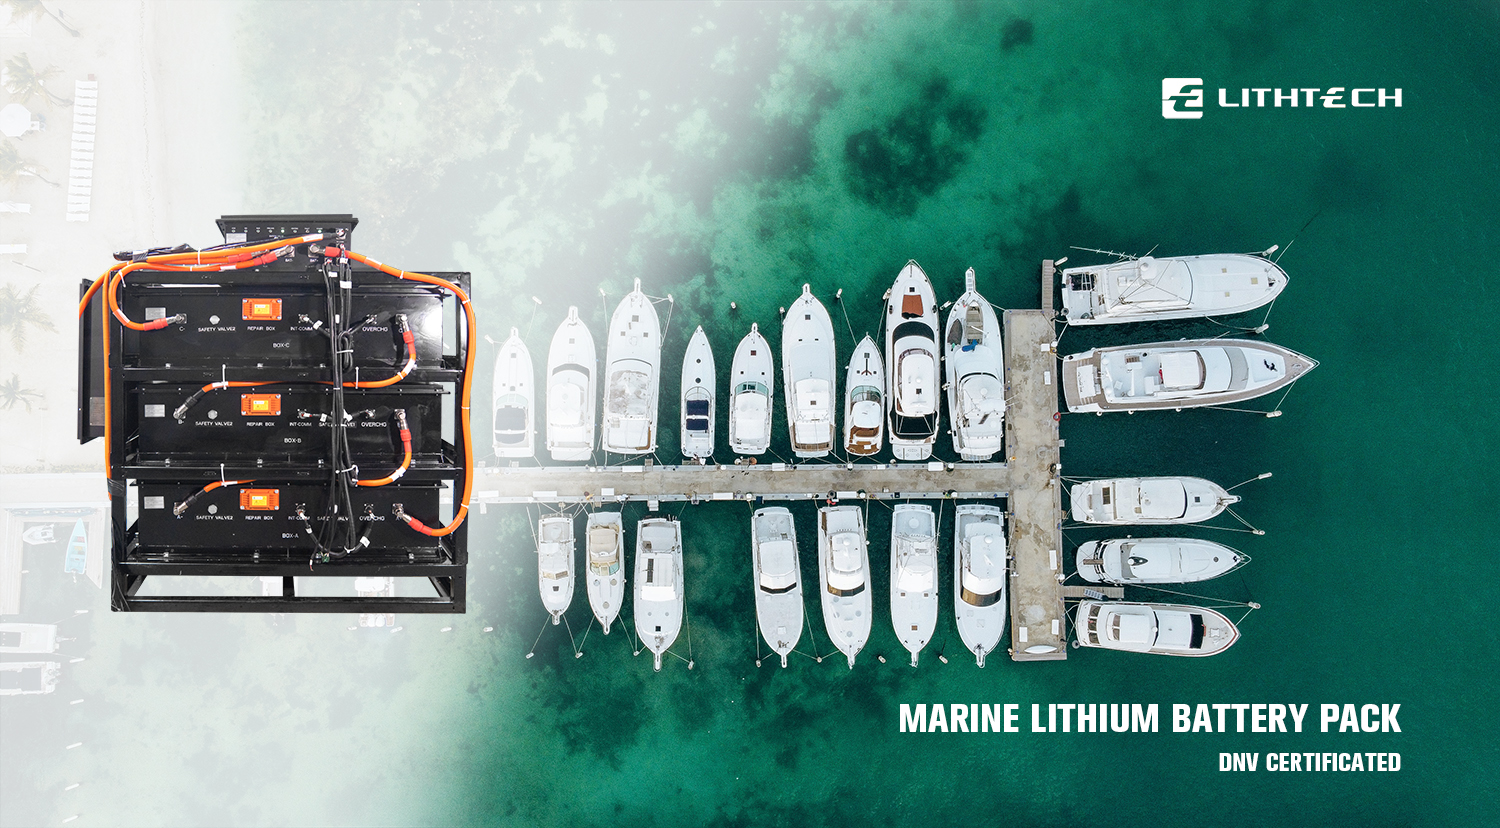 Why Now is the right time to update lithium battery for your marine boat?